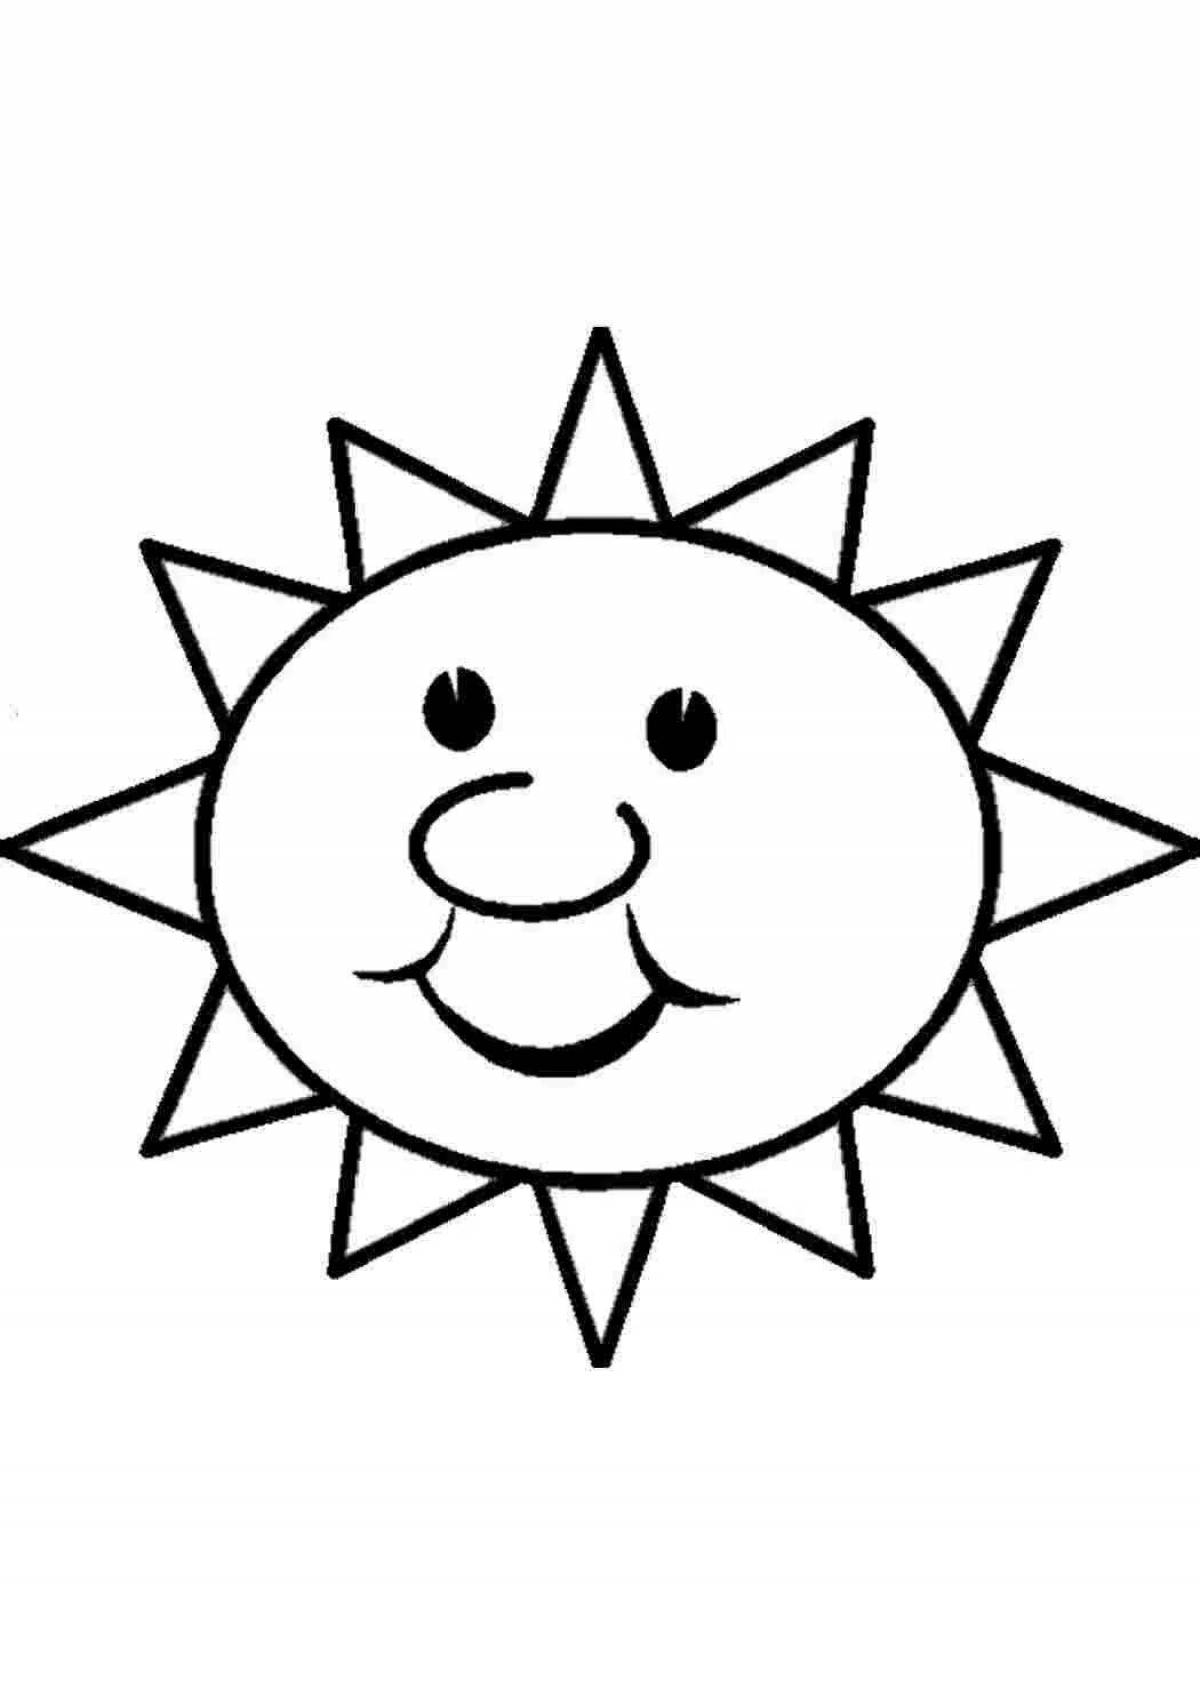 Playful kun coloring page for kids